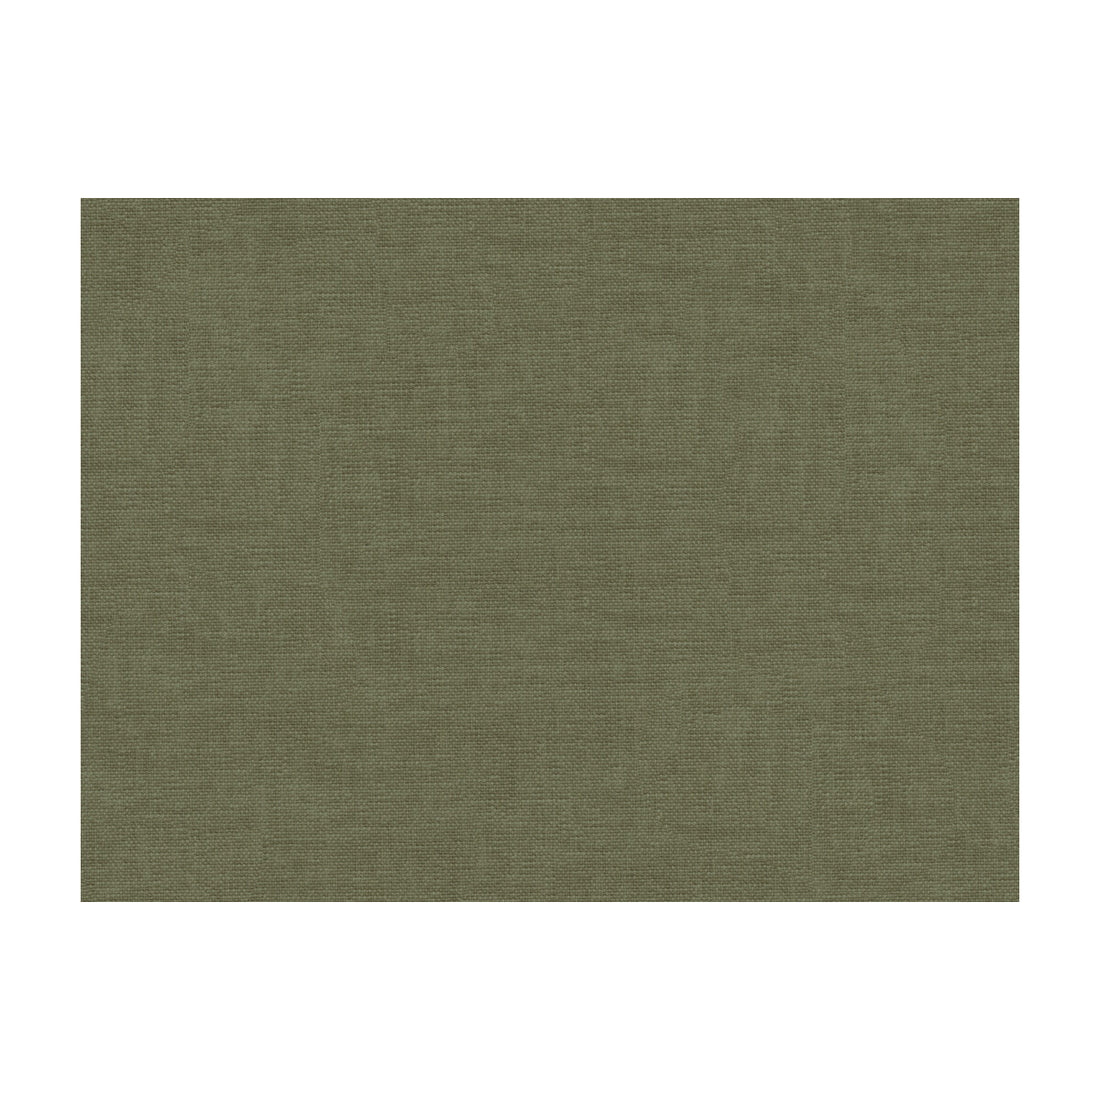 Kravet Basics fabric in 33214-11 color - pattern 33214.11.0 - by Kravet Basics in the Perfect Plains collection